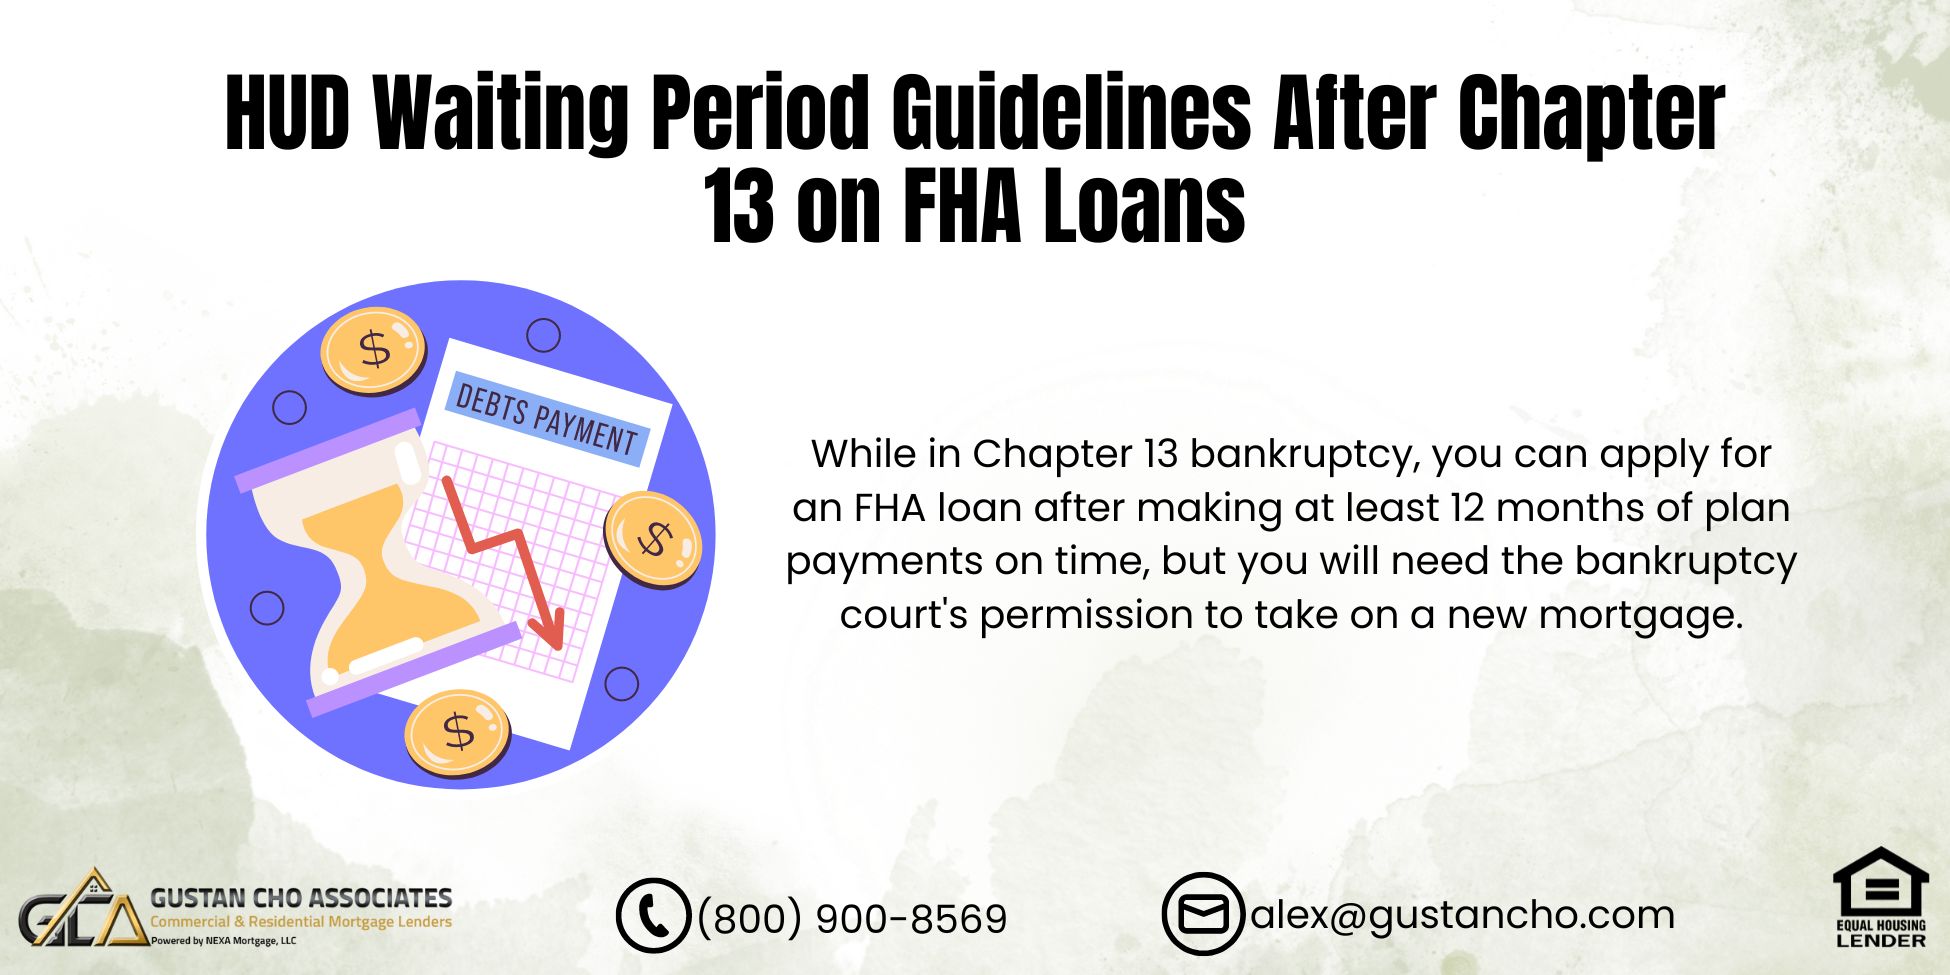 HUD Waiting Period Guidelines After Chapter 13